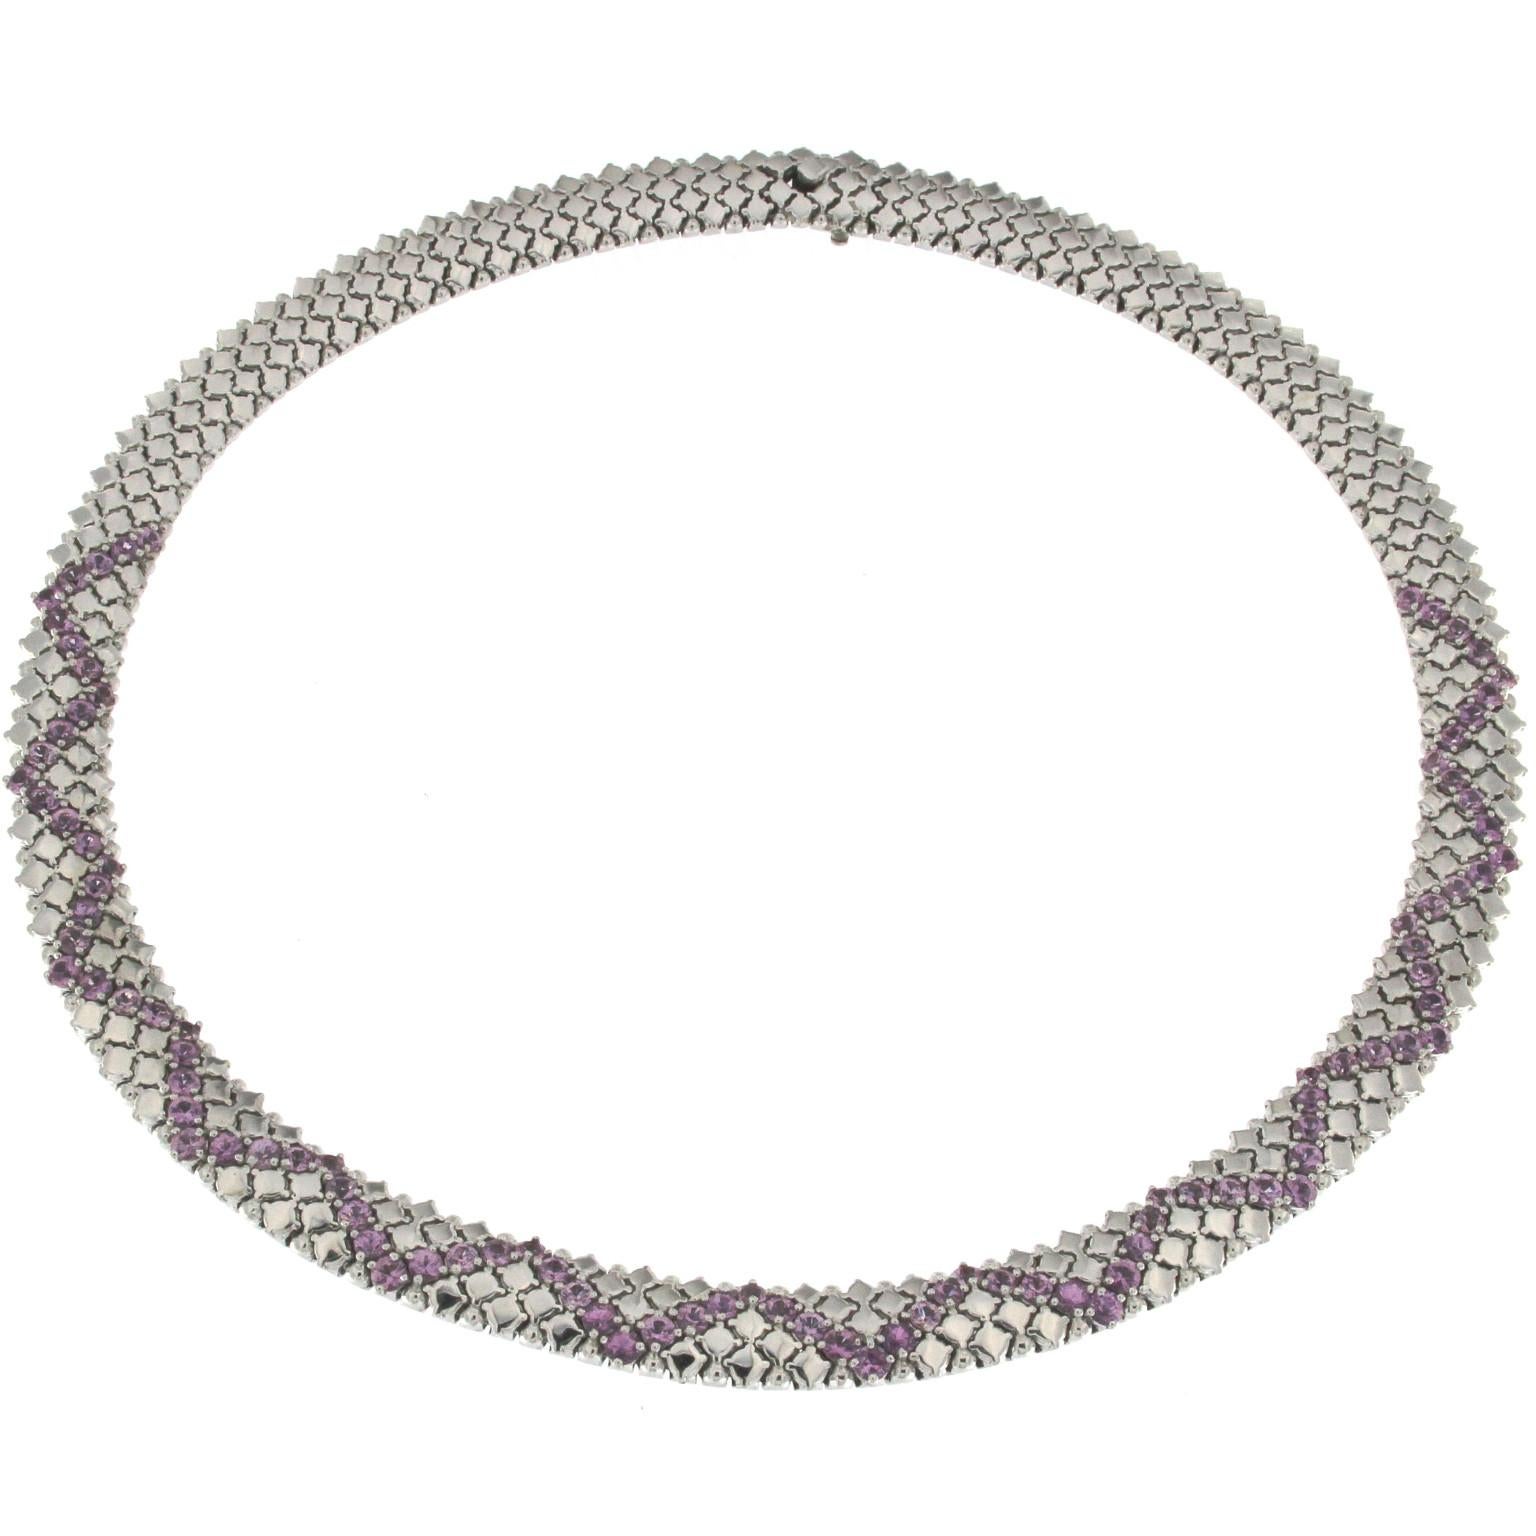 This necklace is soft to wear as a fabric, refined and elegant is really a unique piece. Made entirely of 18 kt white gold. The design that creates the pink sapphires from an effect of amazing lights.
The total weight of the 97 pink sapphires is CT